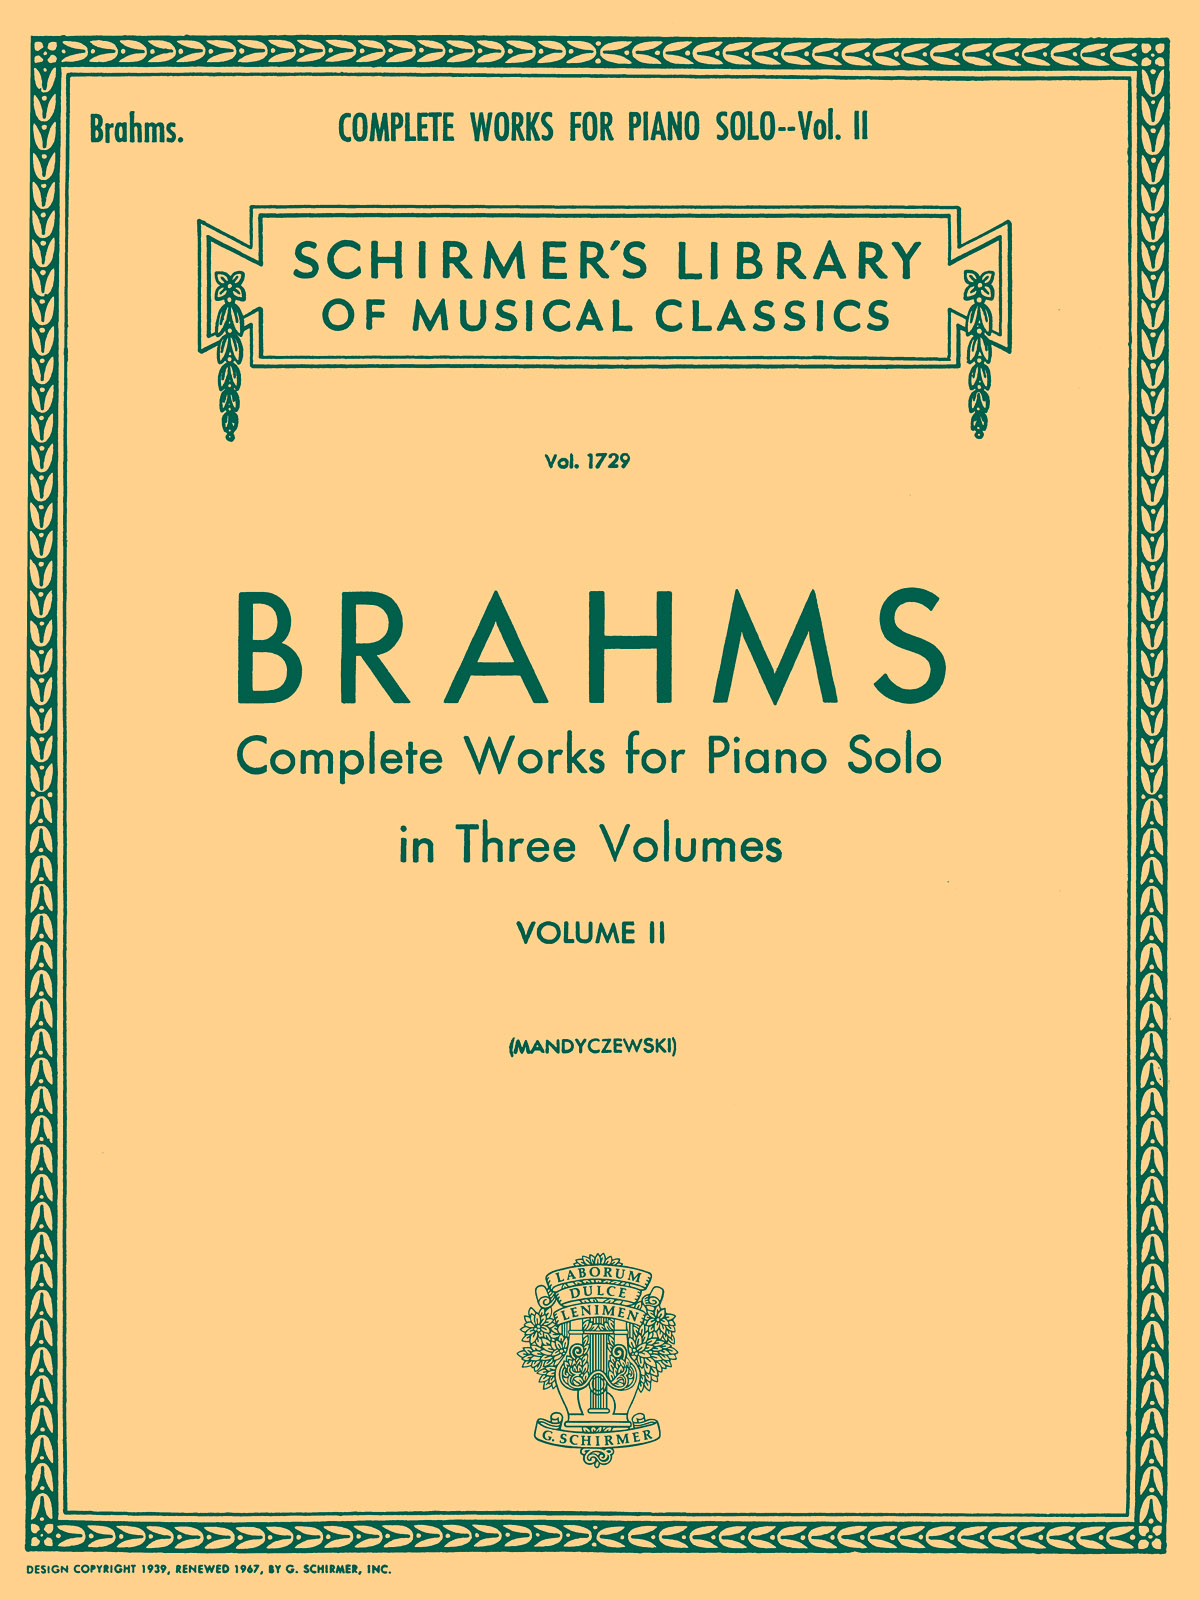 Brahms: Complete Works for Piano Solo - Volume 2